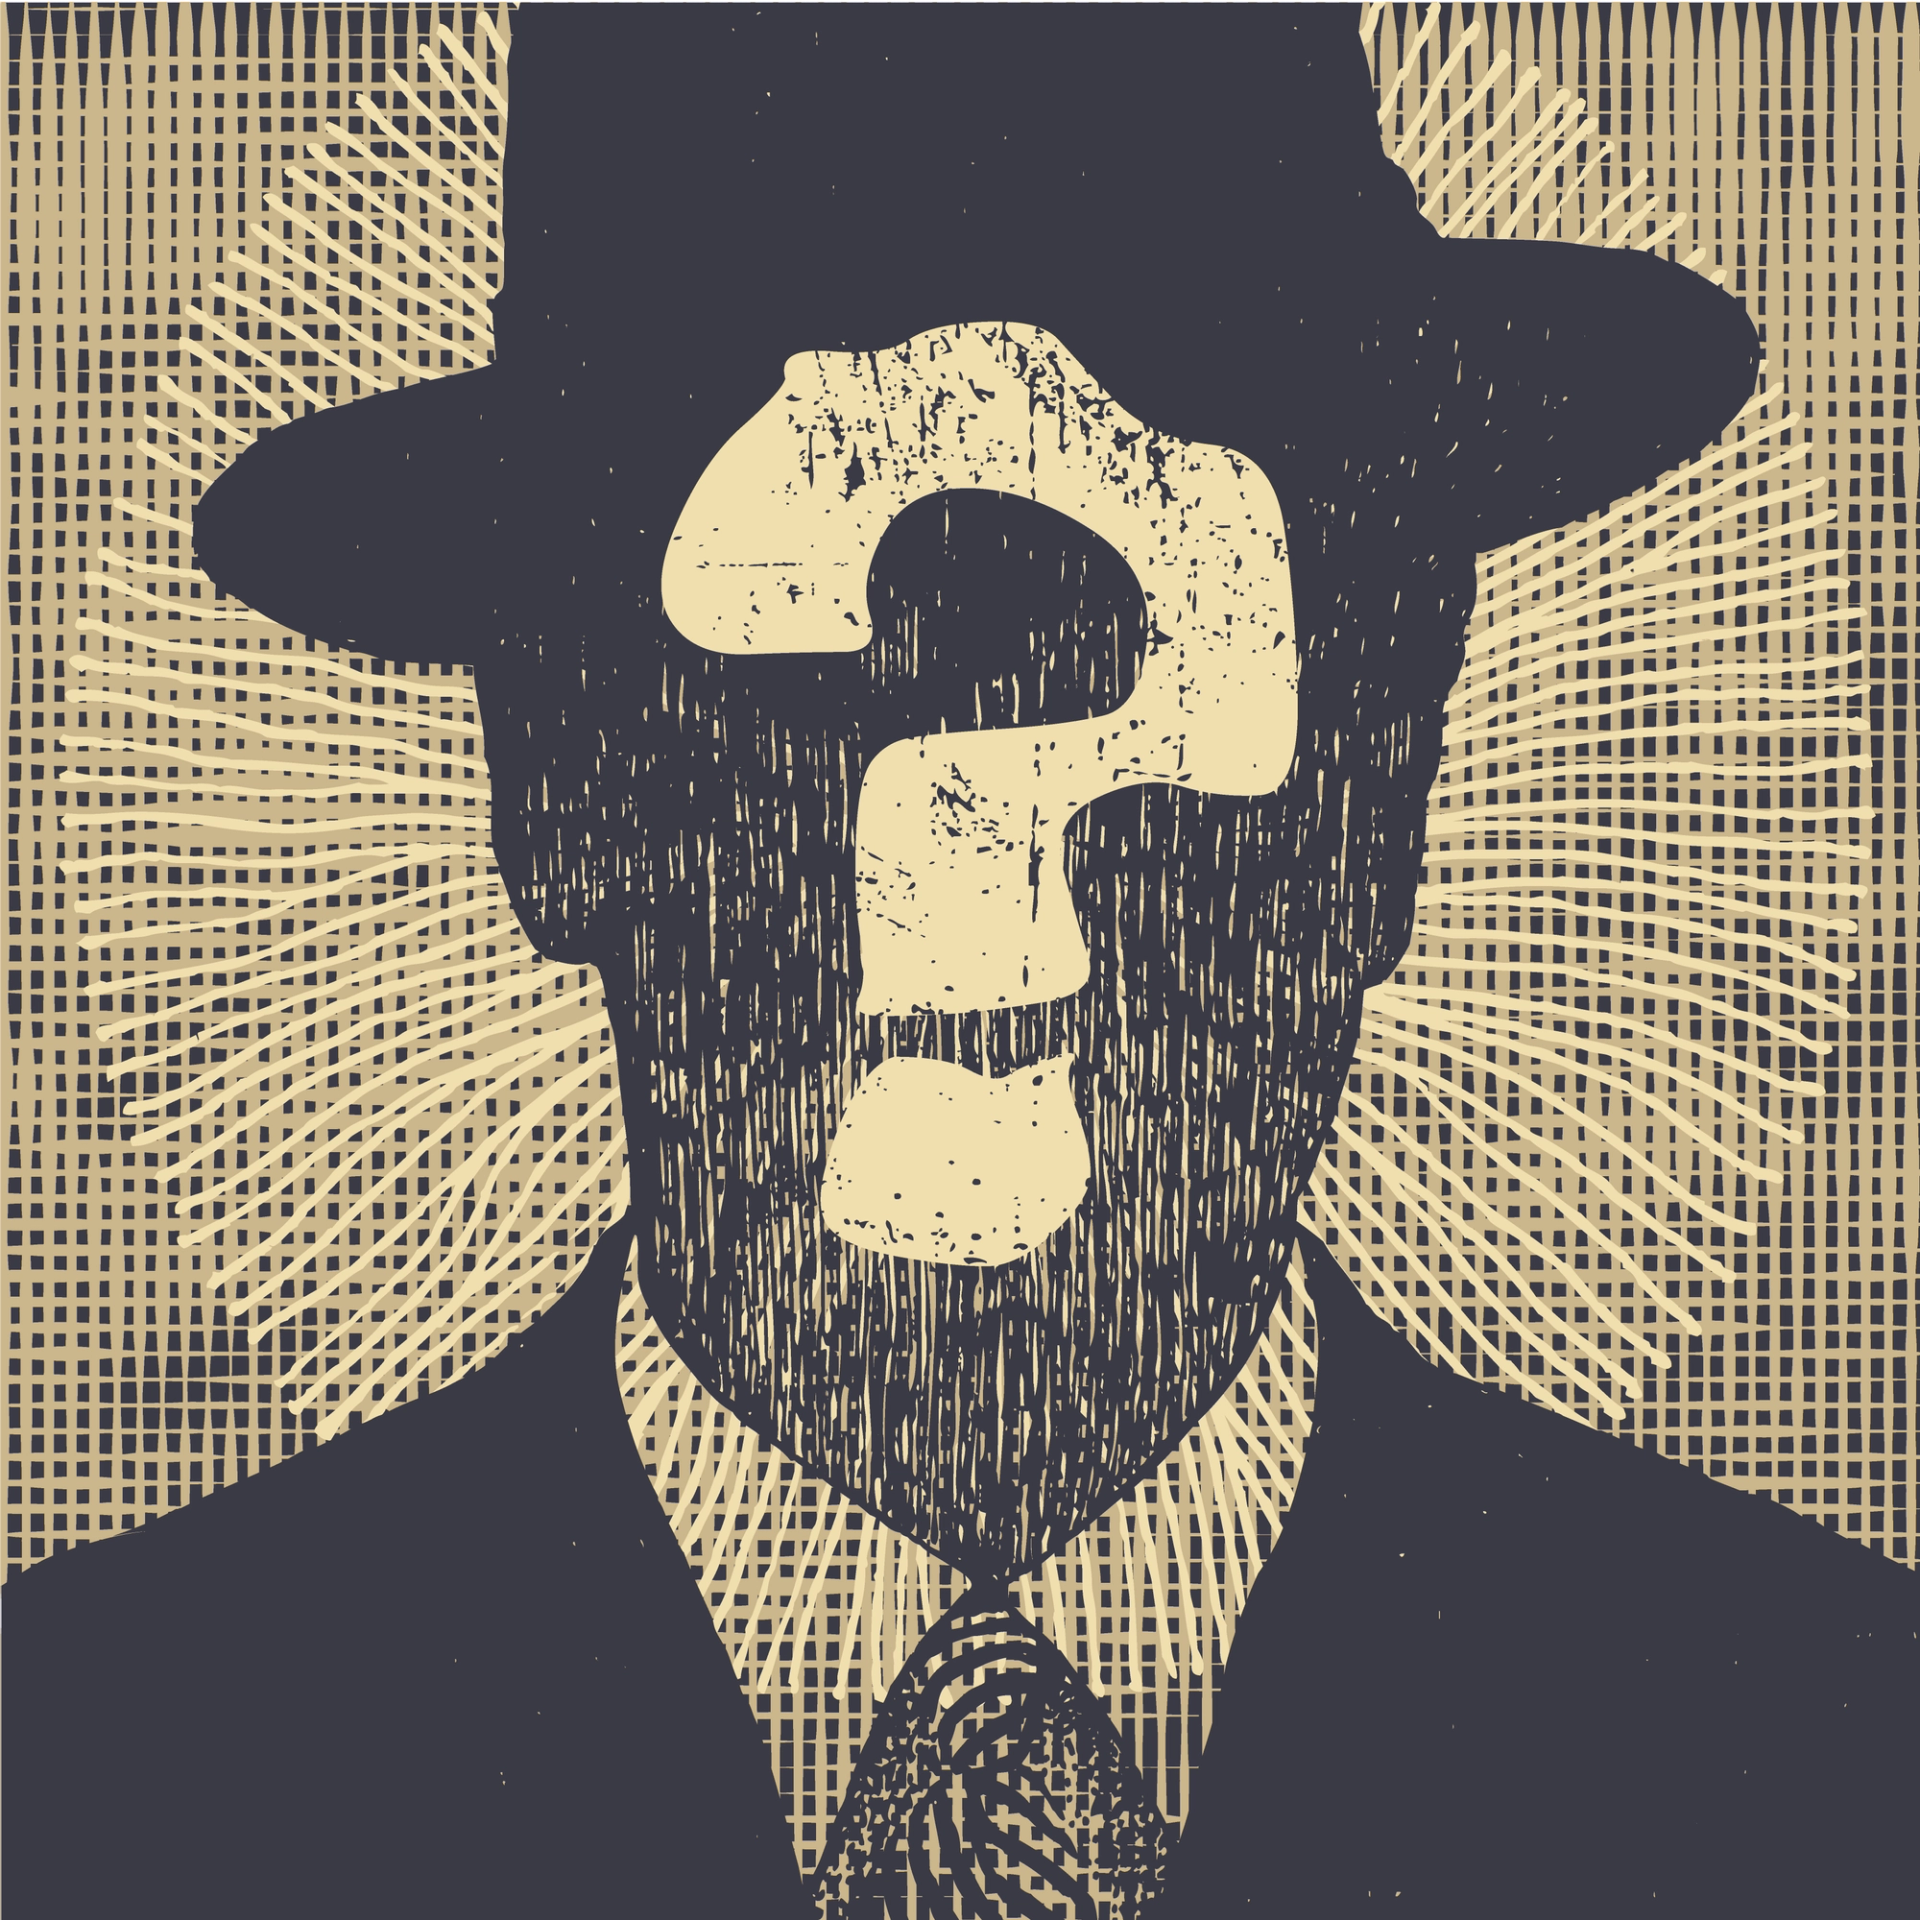 Silhouette illustration of the head and shoulders of a man, wearing a suit and hat